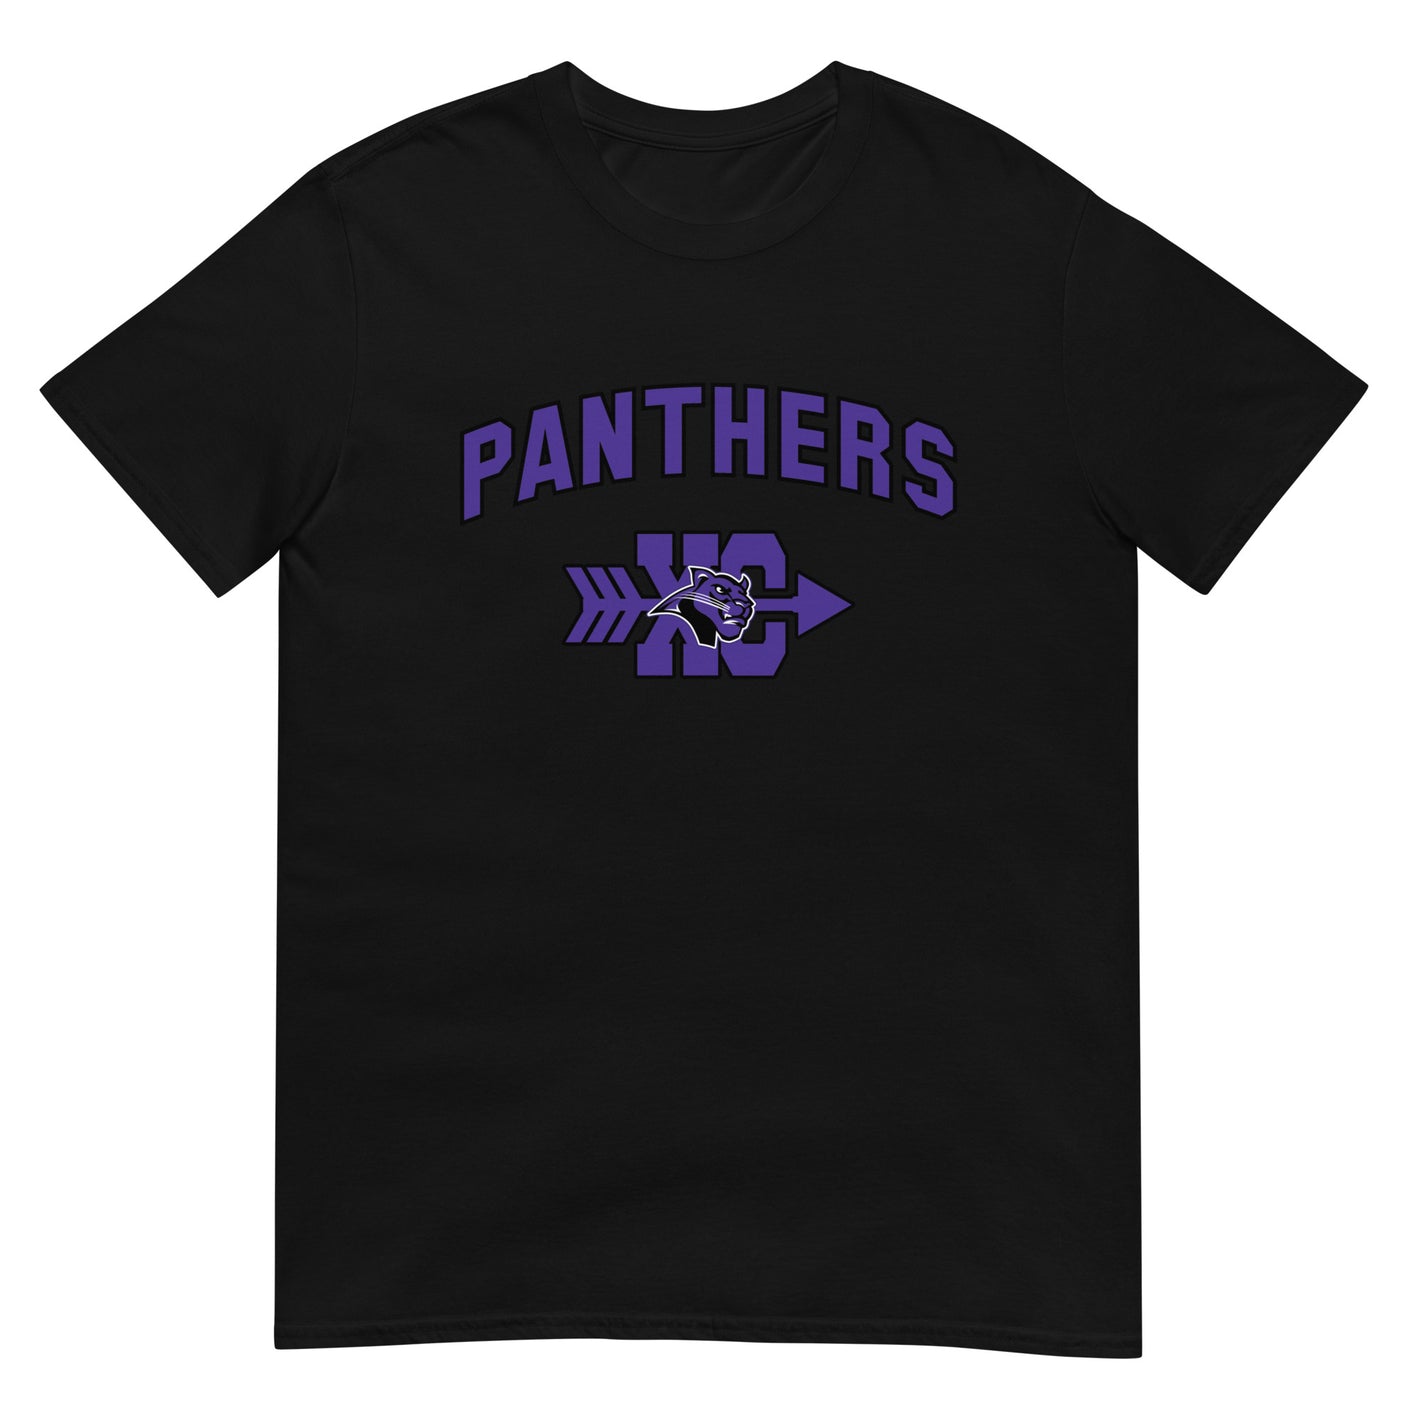 Panthers Cross Country Short-Sleeve Unisex T-Shirt